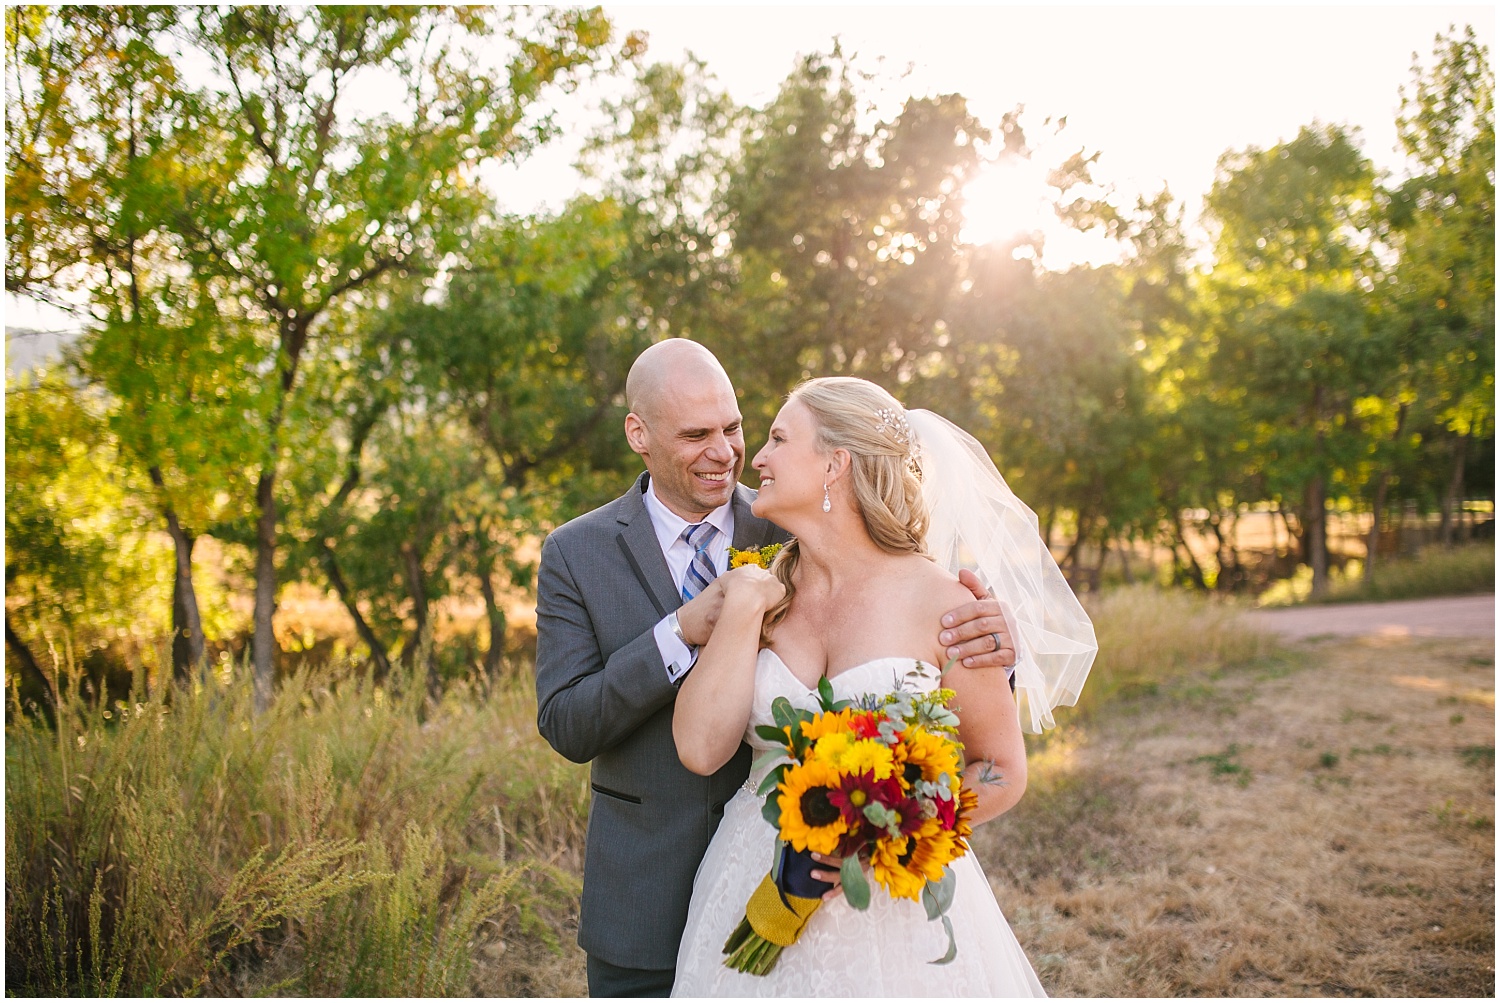 Bride and groom embrace at golden hour at Bear Creek Park in Colorado Springs